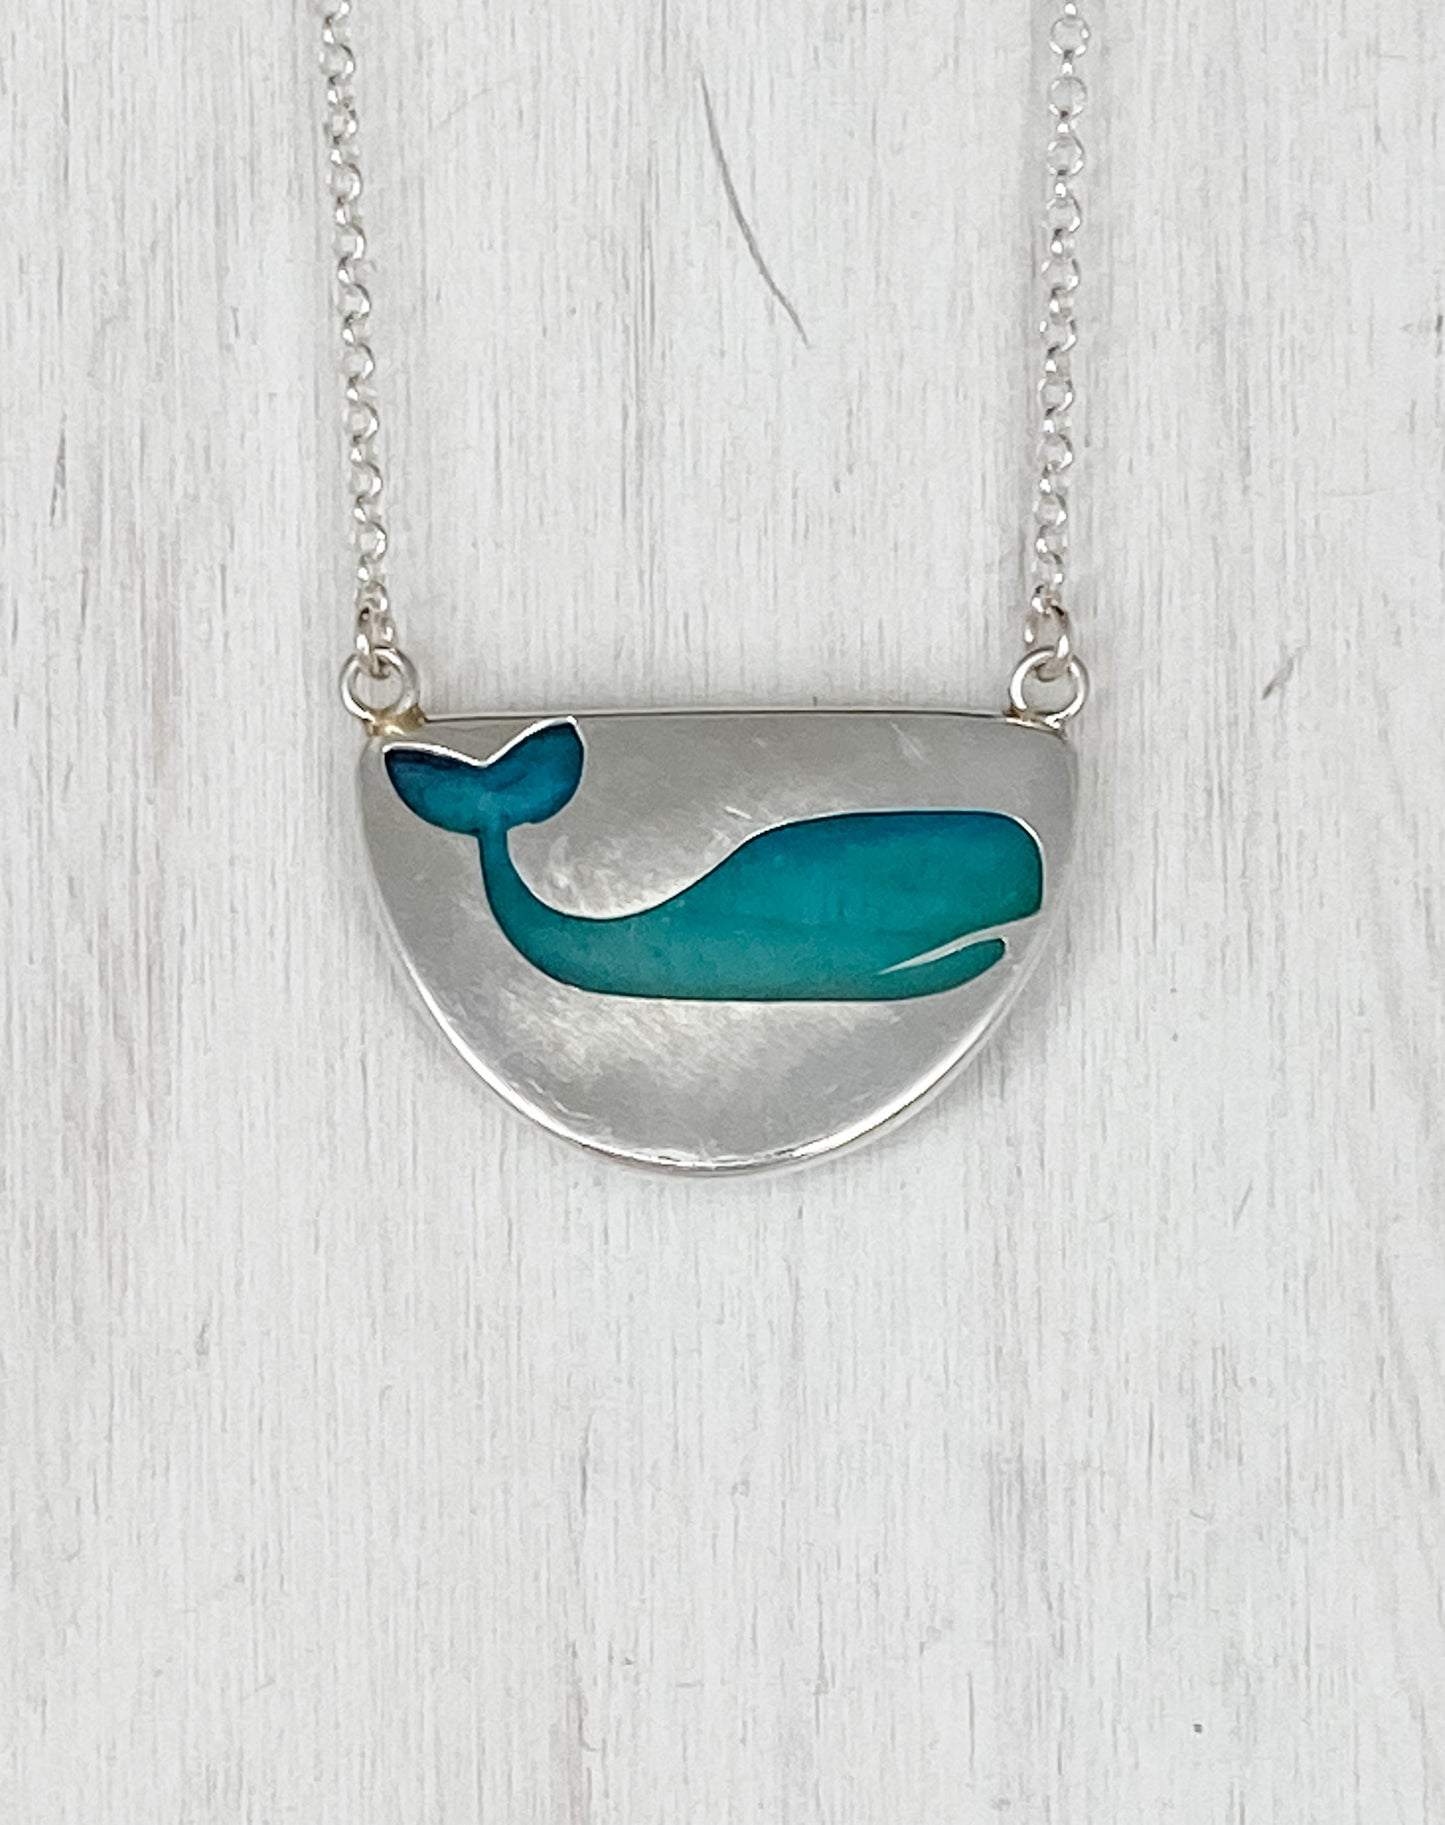 Opalized Wood Pendant with Whale